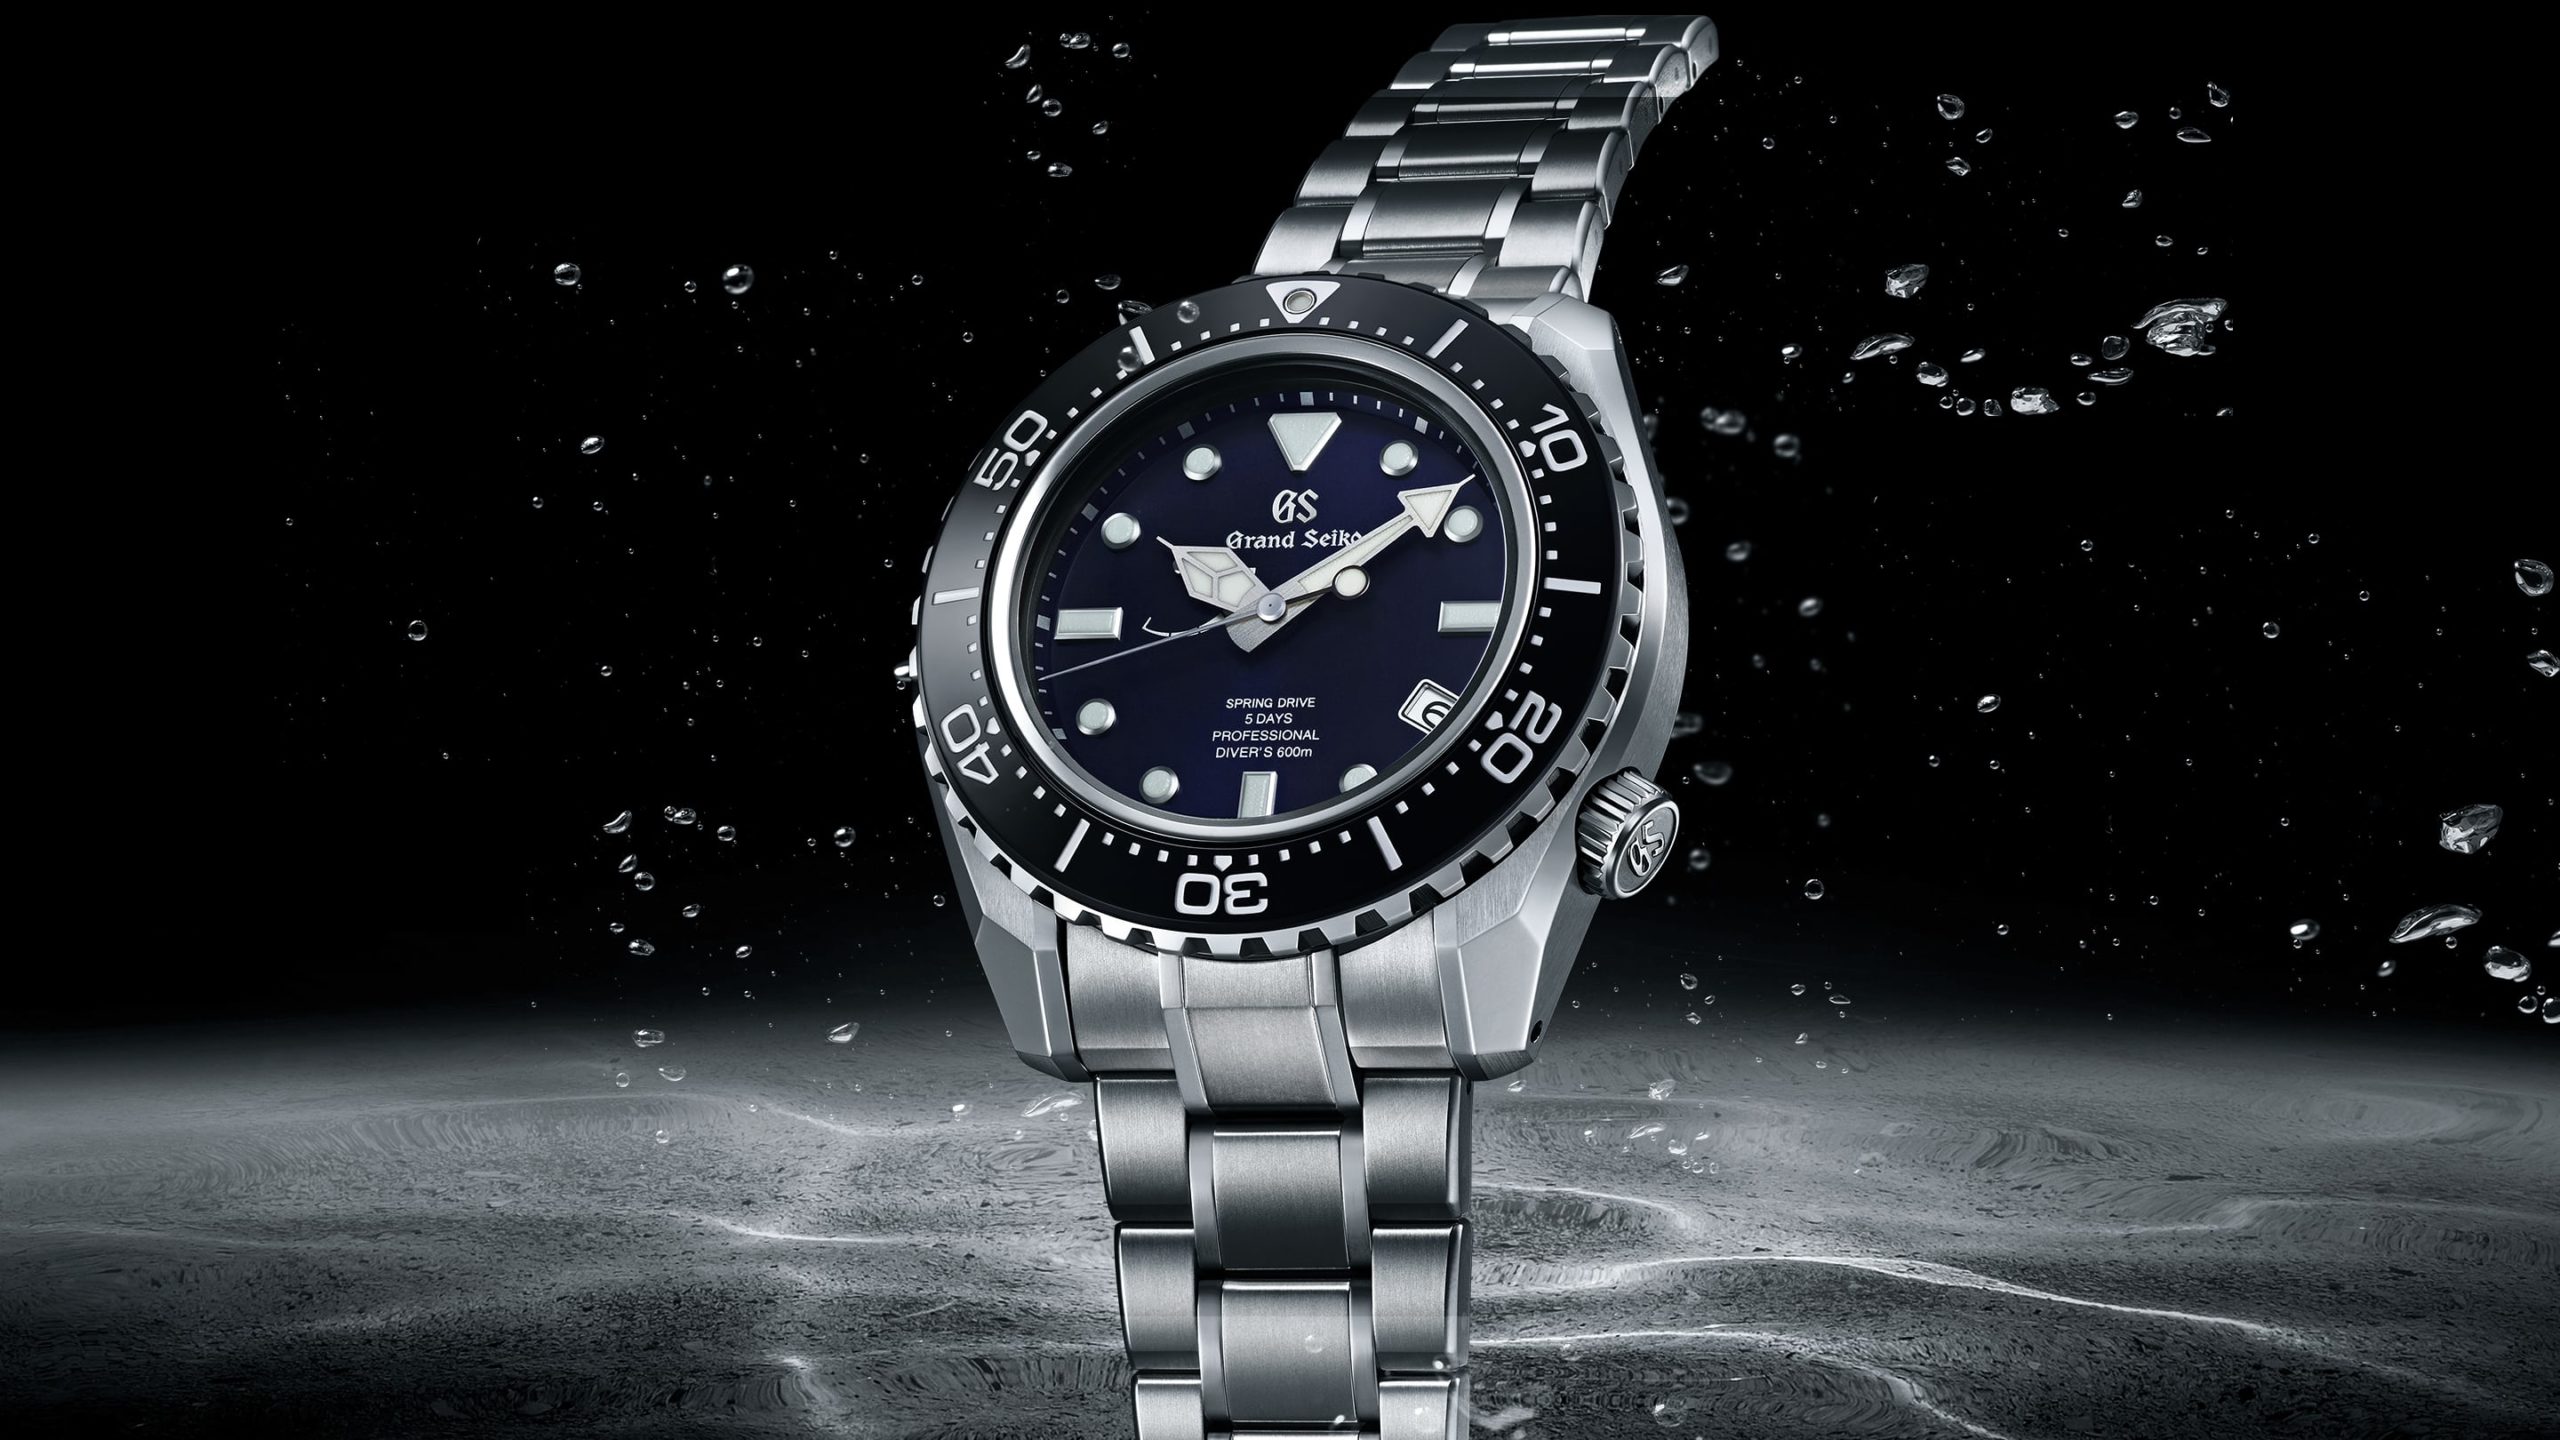 Introducing The Grand Seiko 60th Anniversary Limited Edition Professional  Diver's 600M SLGA001 Watch